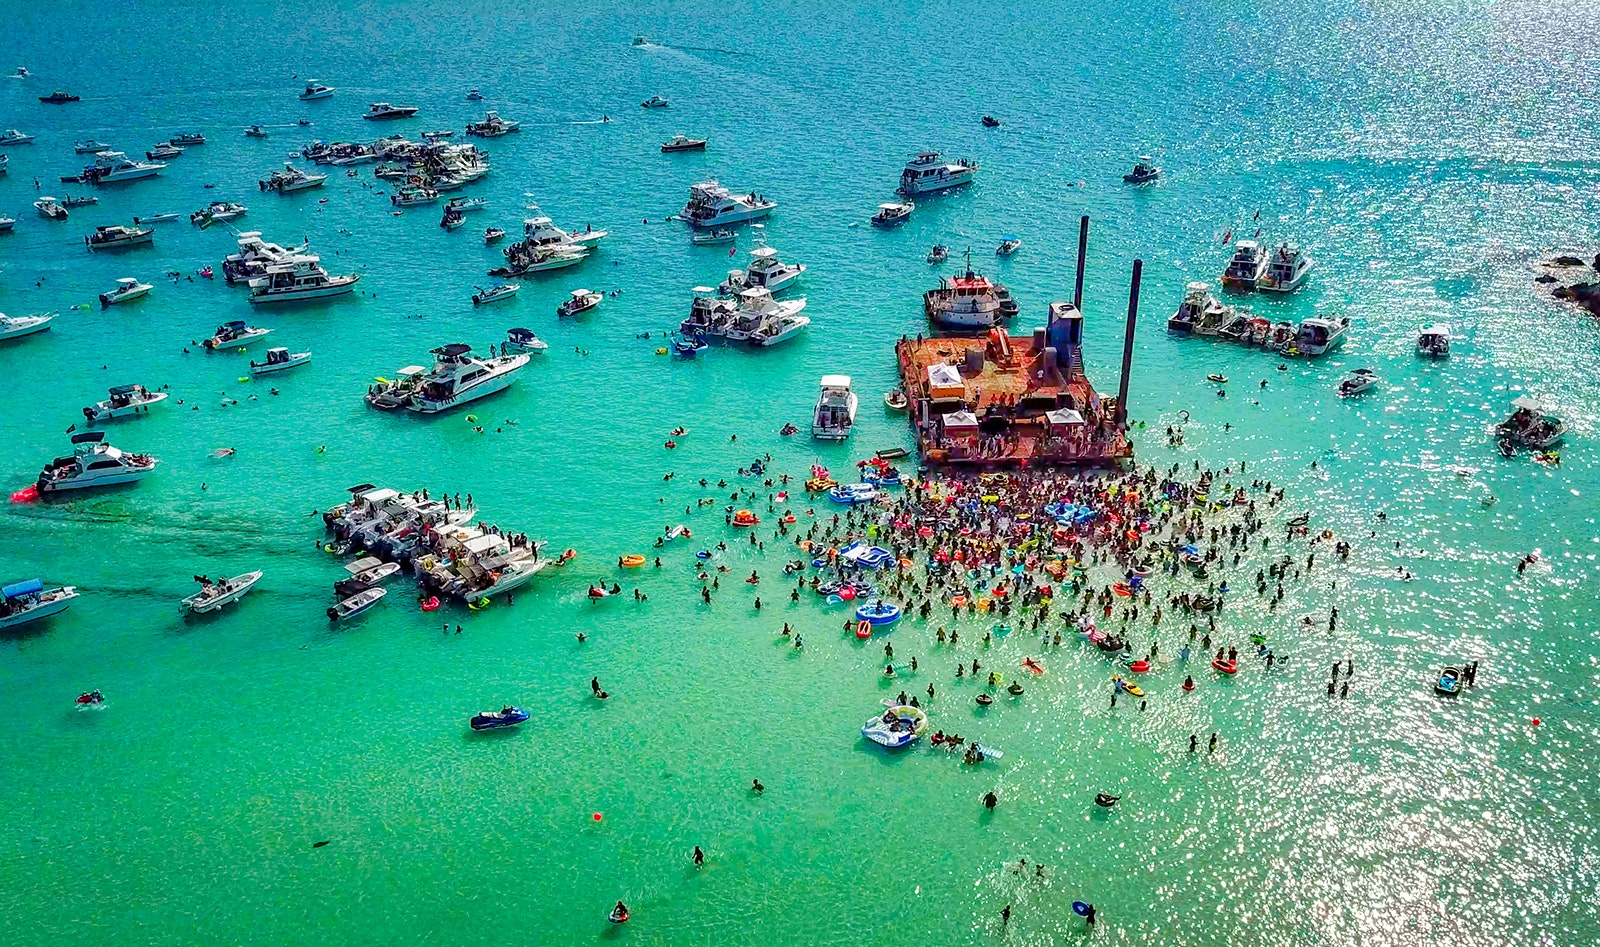 An aerial shot of boats and people in the water surrounding a large wooden raft